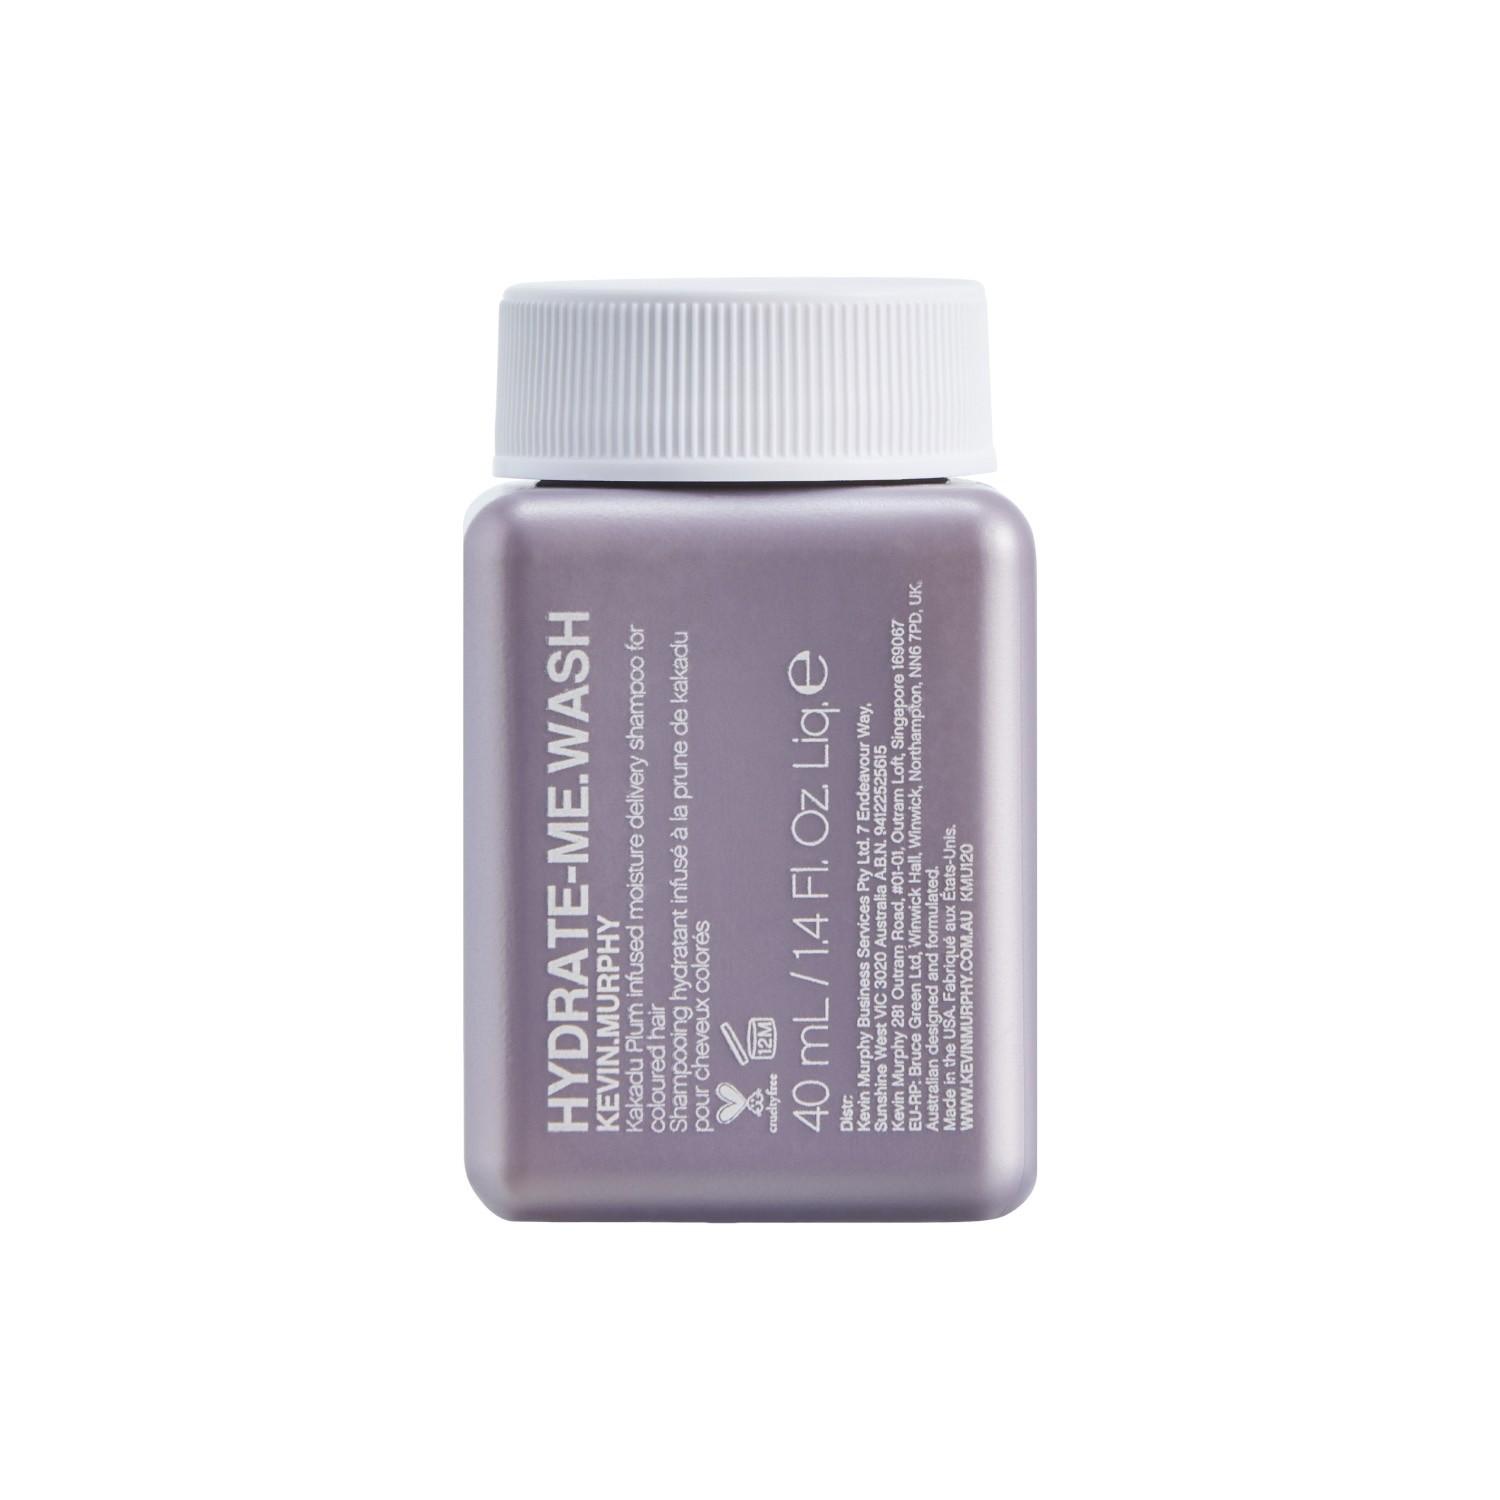 KEVIN.MURPHY hydrate-me.wash